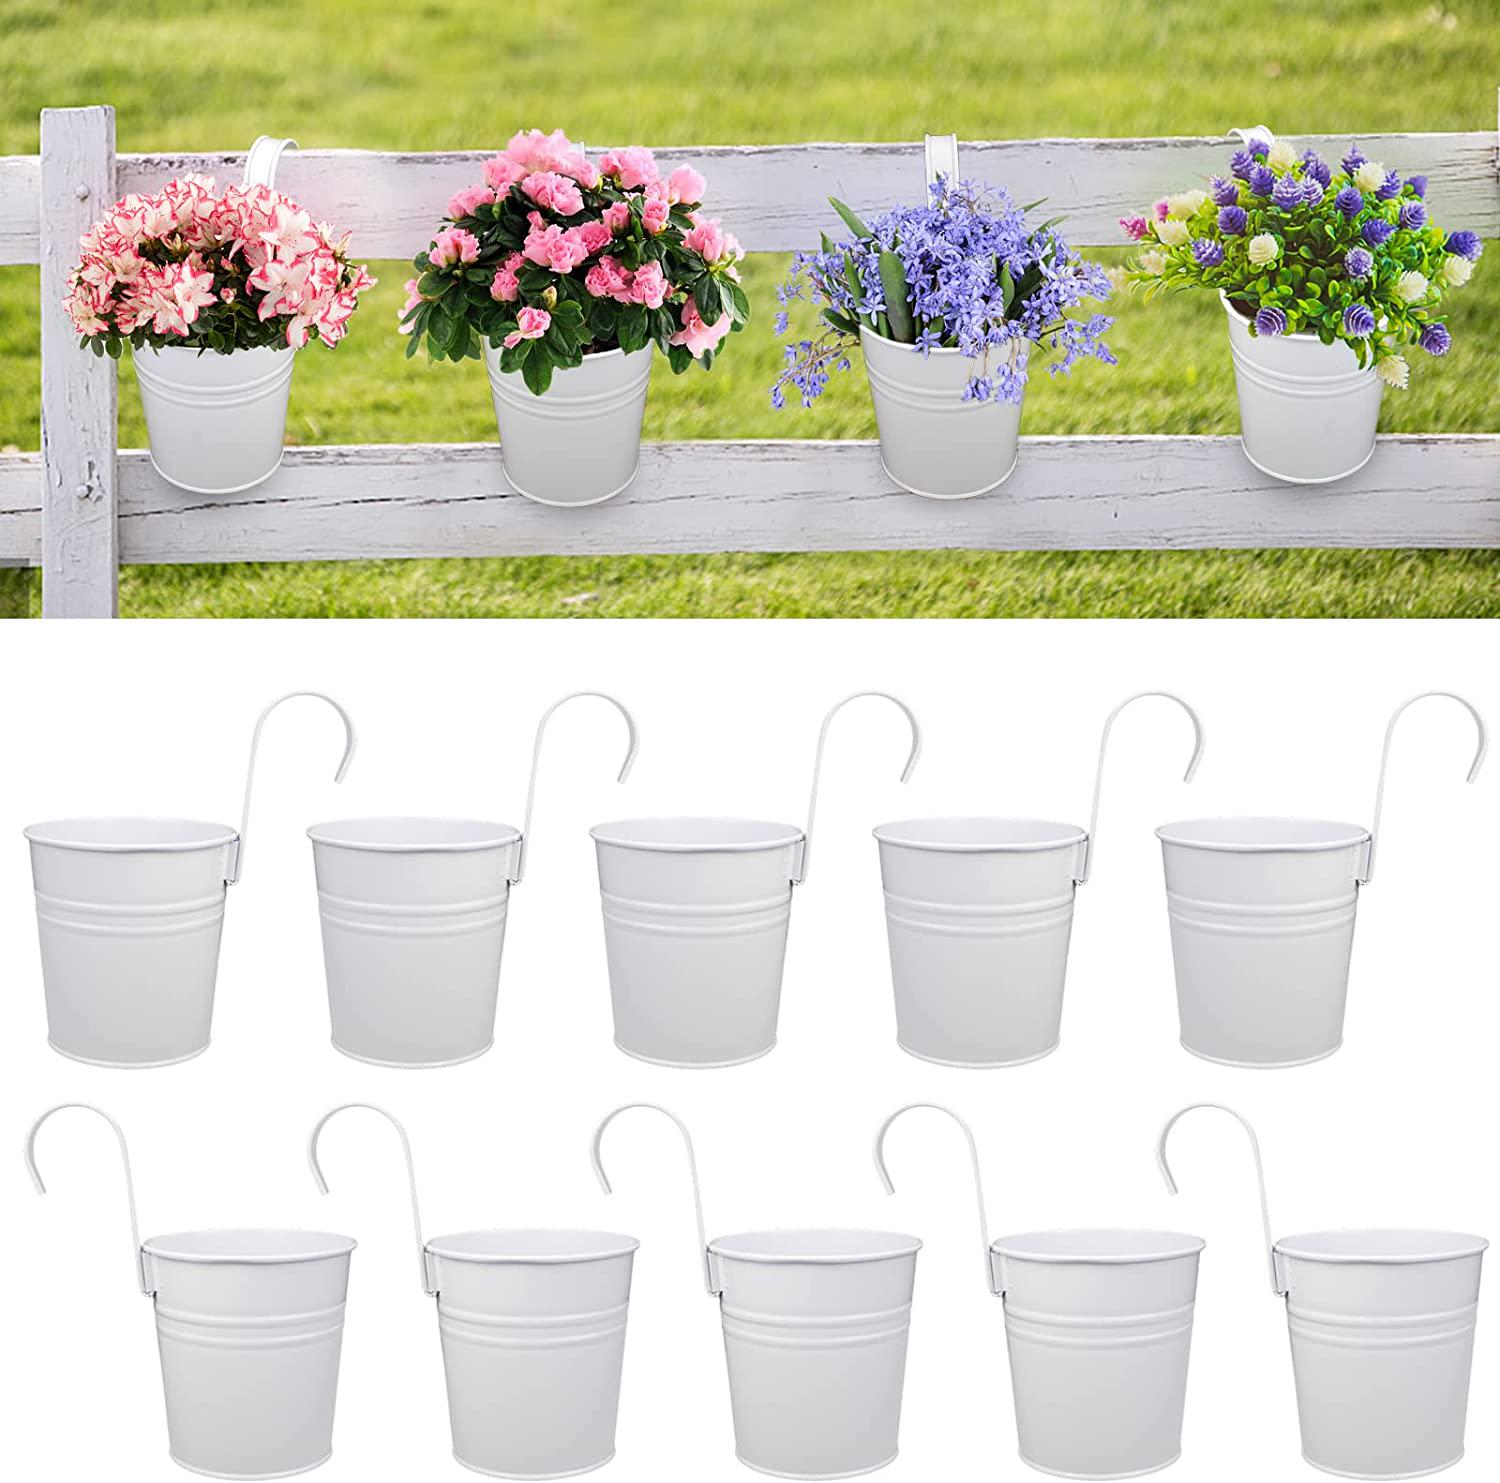 4 Inch Metal Iron Hanging Flower Plant Pots,10 Pack Colorful Balcony Garden Planters with Hanging Fence Plant Planter with Detachable Hook (White)-